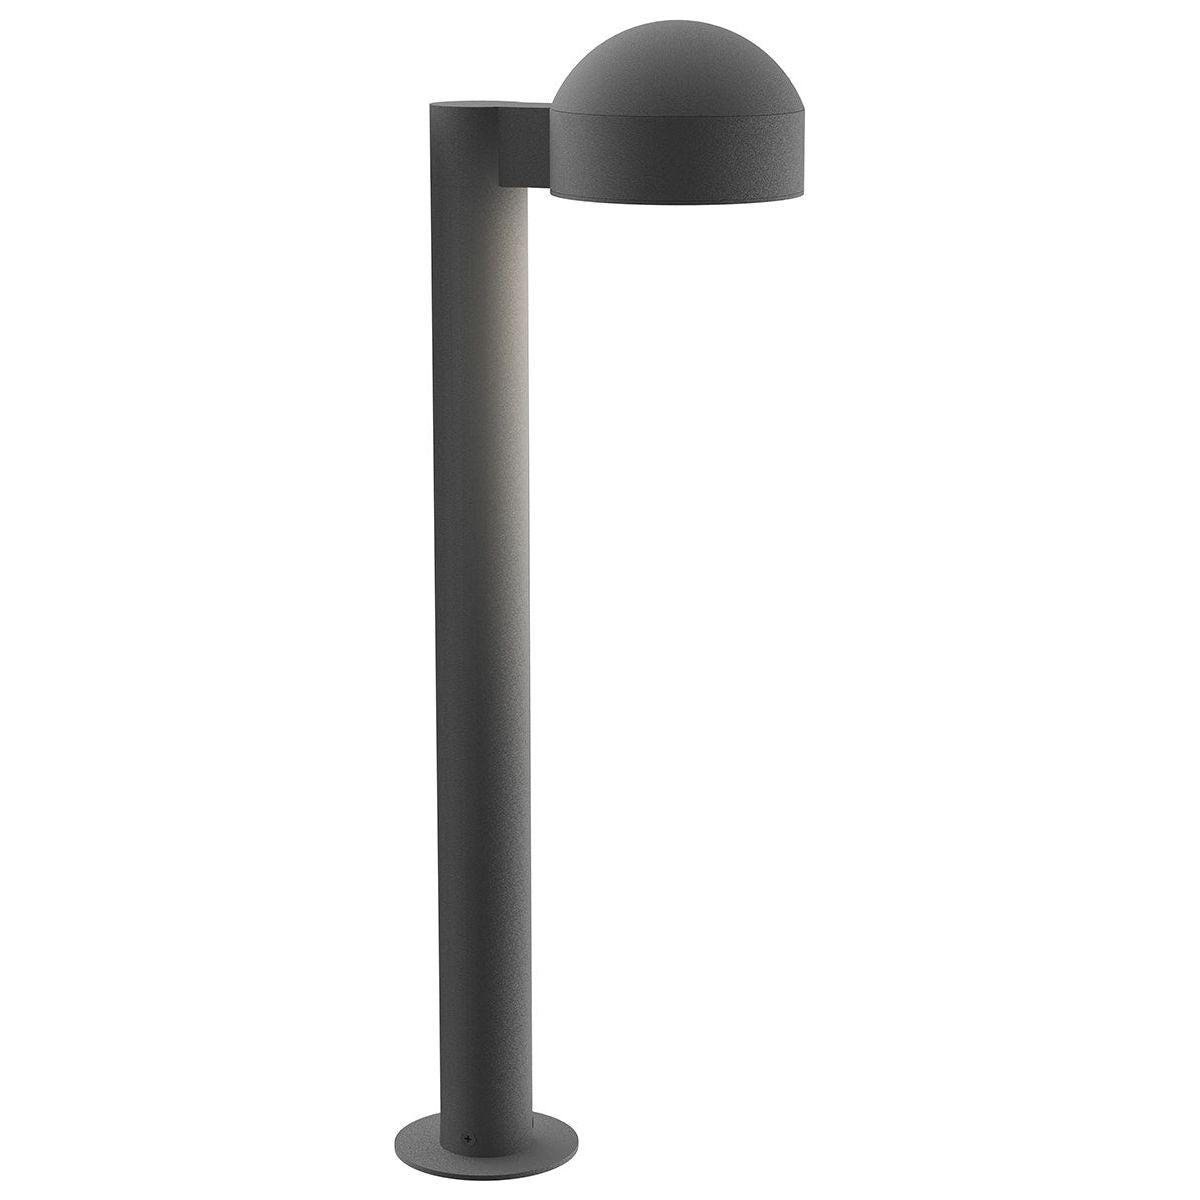 REALS 22" LED Bollard with Dome Cap and Plate Lens